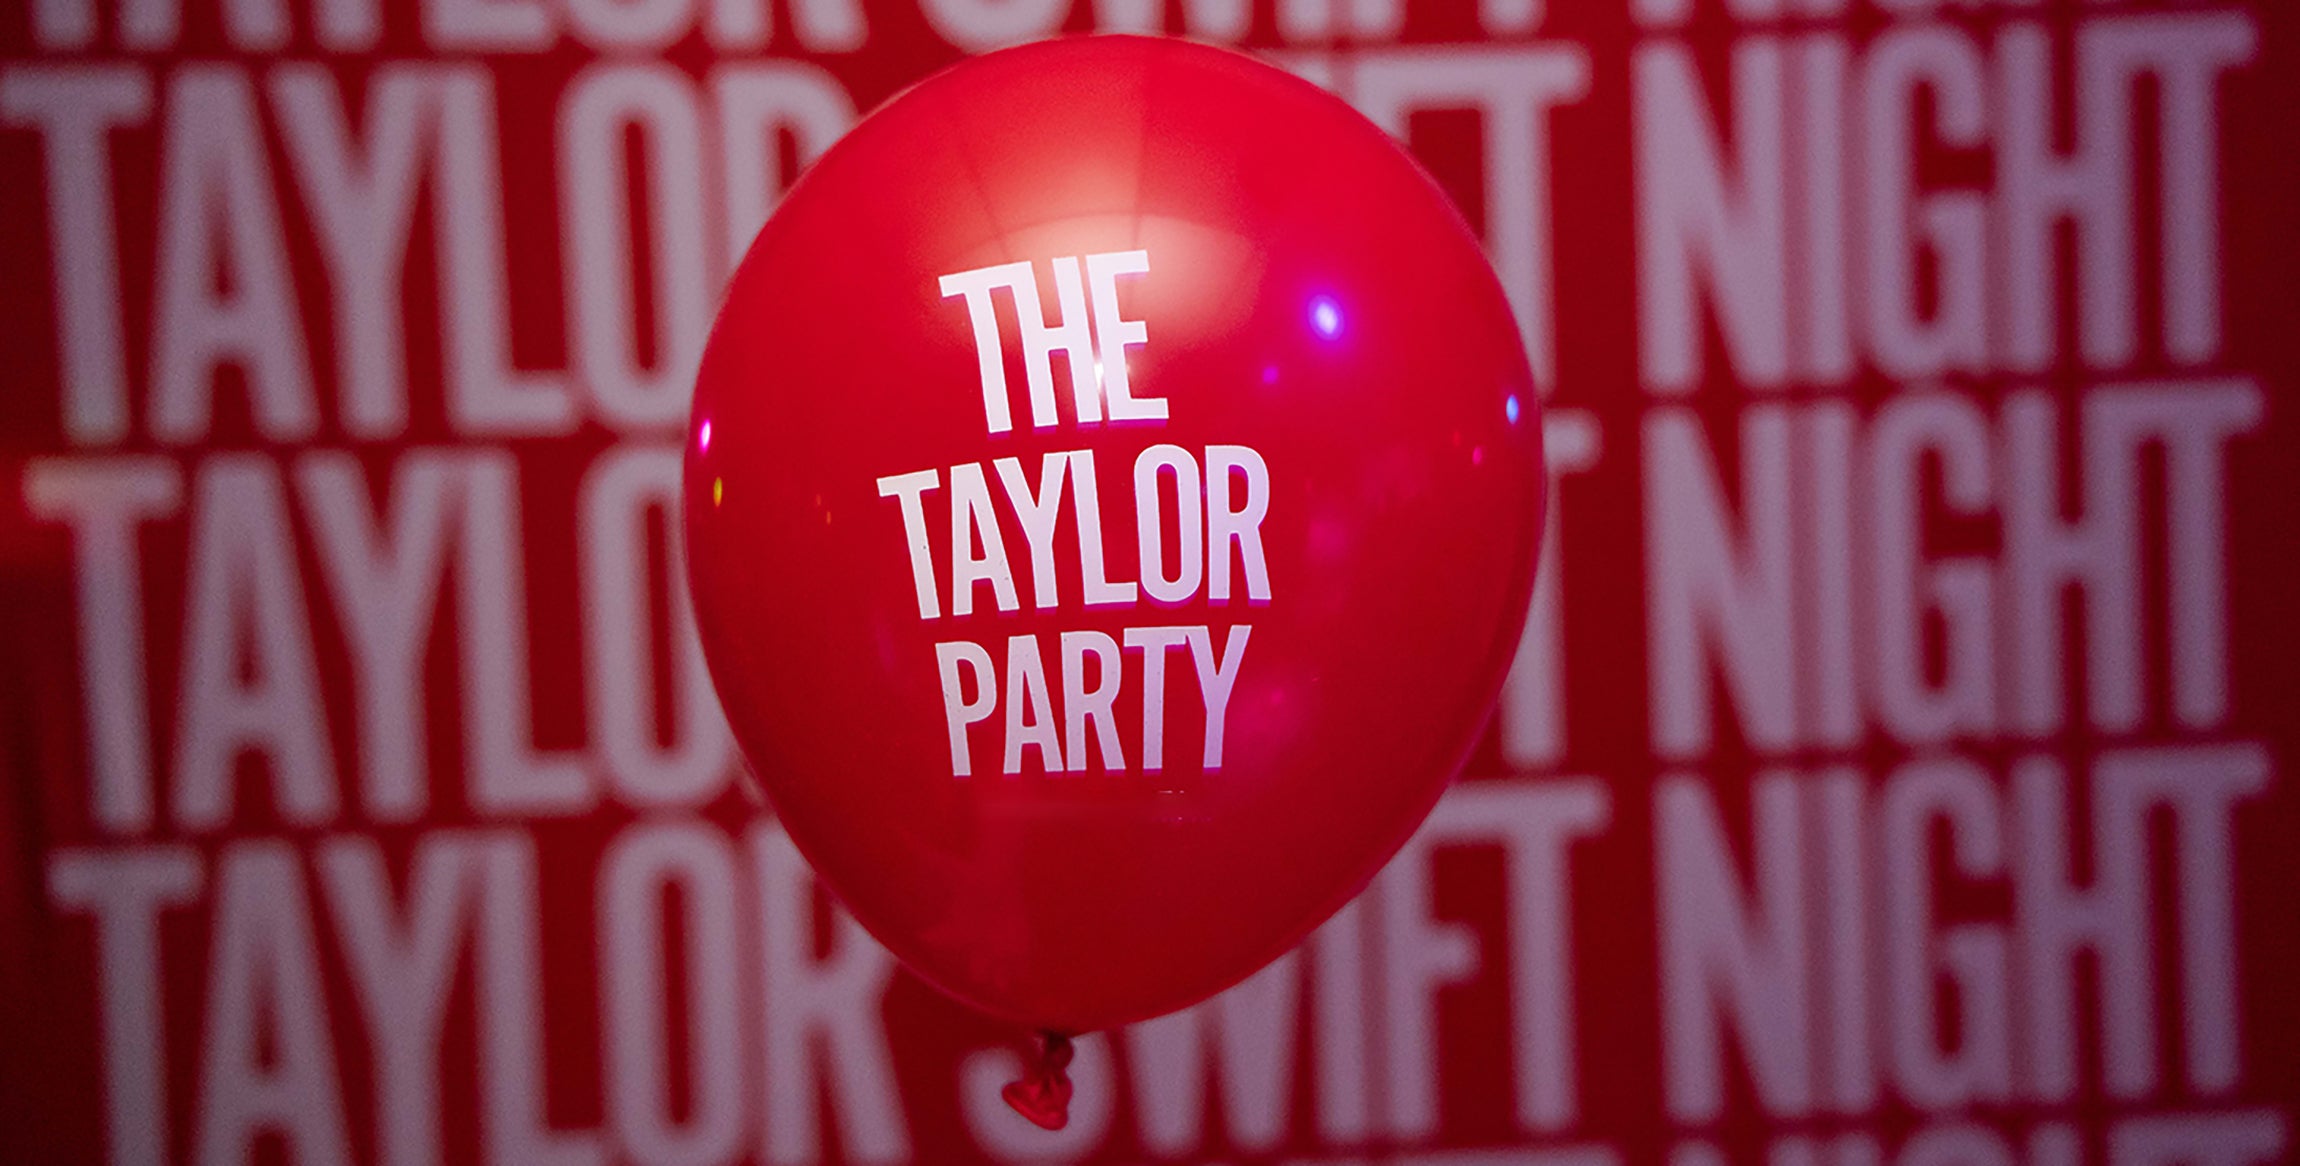 The Taylor Party: Taylor Swift Night - 18+ presale code for early tickets in Wichita